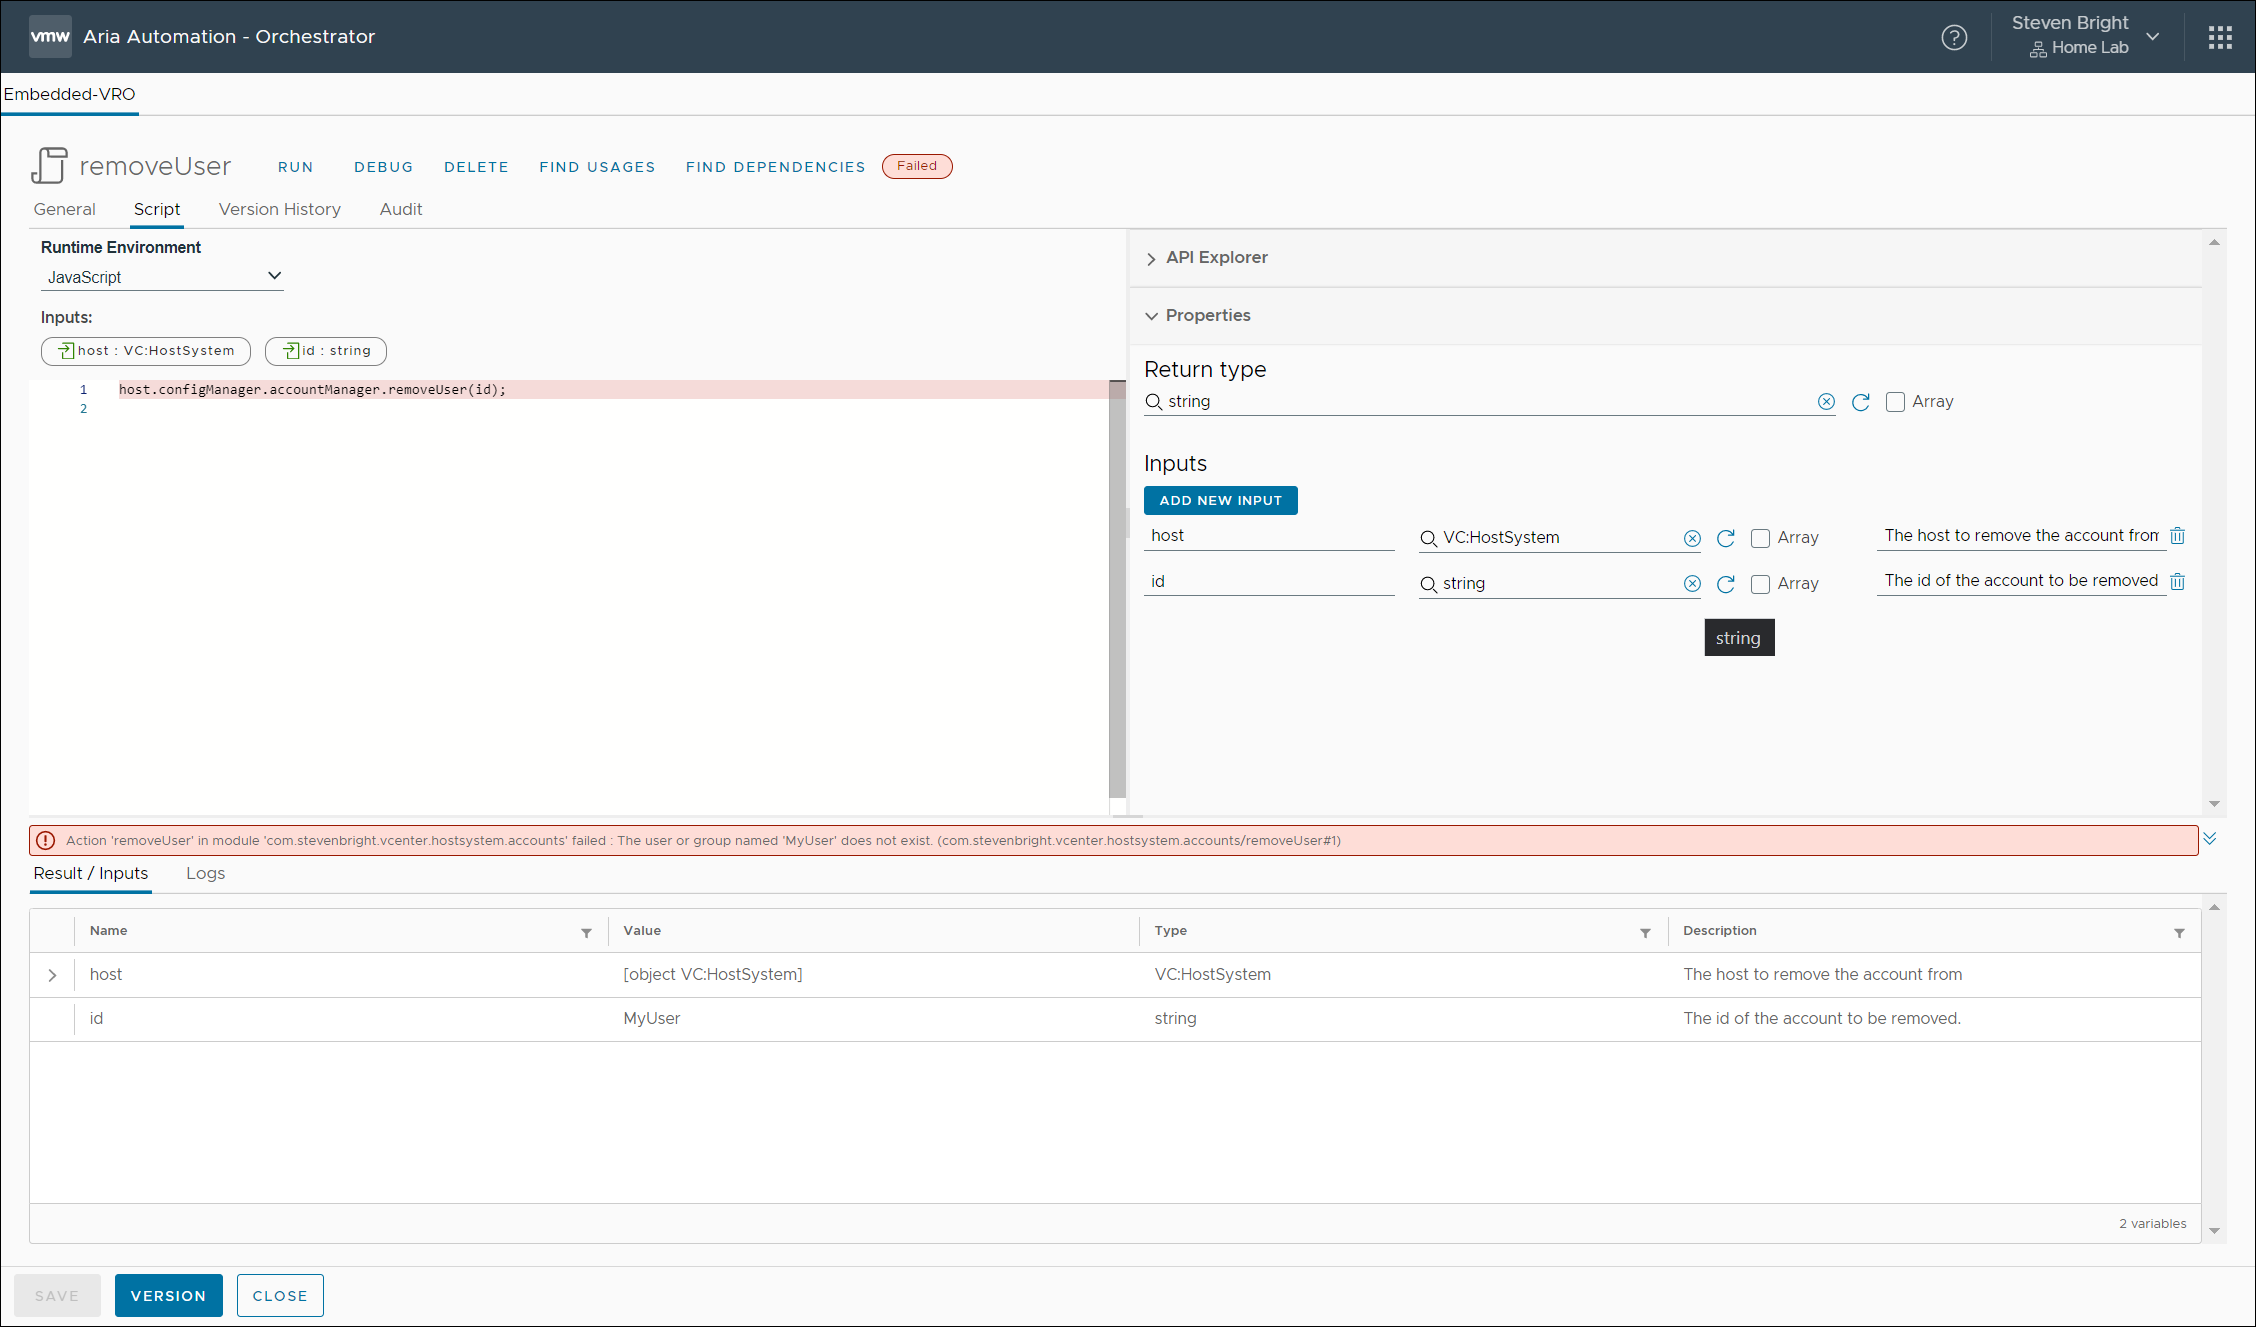 Screenshot of the removeUser action in Aria Automation Orchestrator generating an failed run due to missing user account